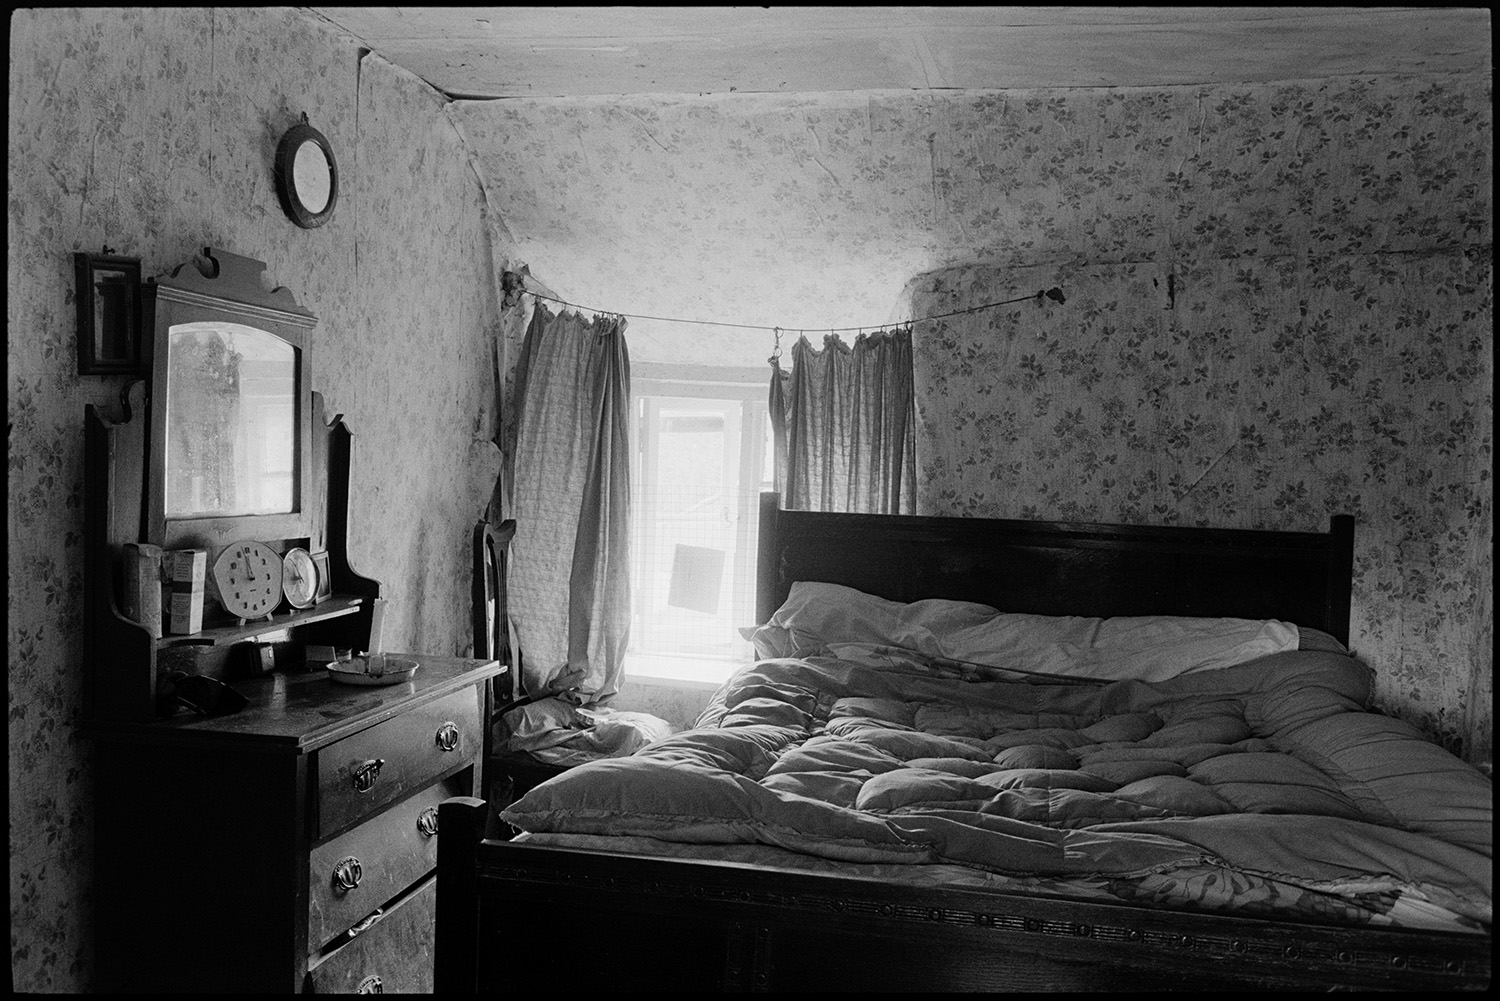 Farmhouse bedroom with clocks dressing table with mirror curtains.
[A farmhouse bedroom at Mount Pleasant, Beamsworthy.  The room contains a bed with a quilt and a dressing table with two clocks and a mirror.  The half drawn curtains are hanging from a wire line.]